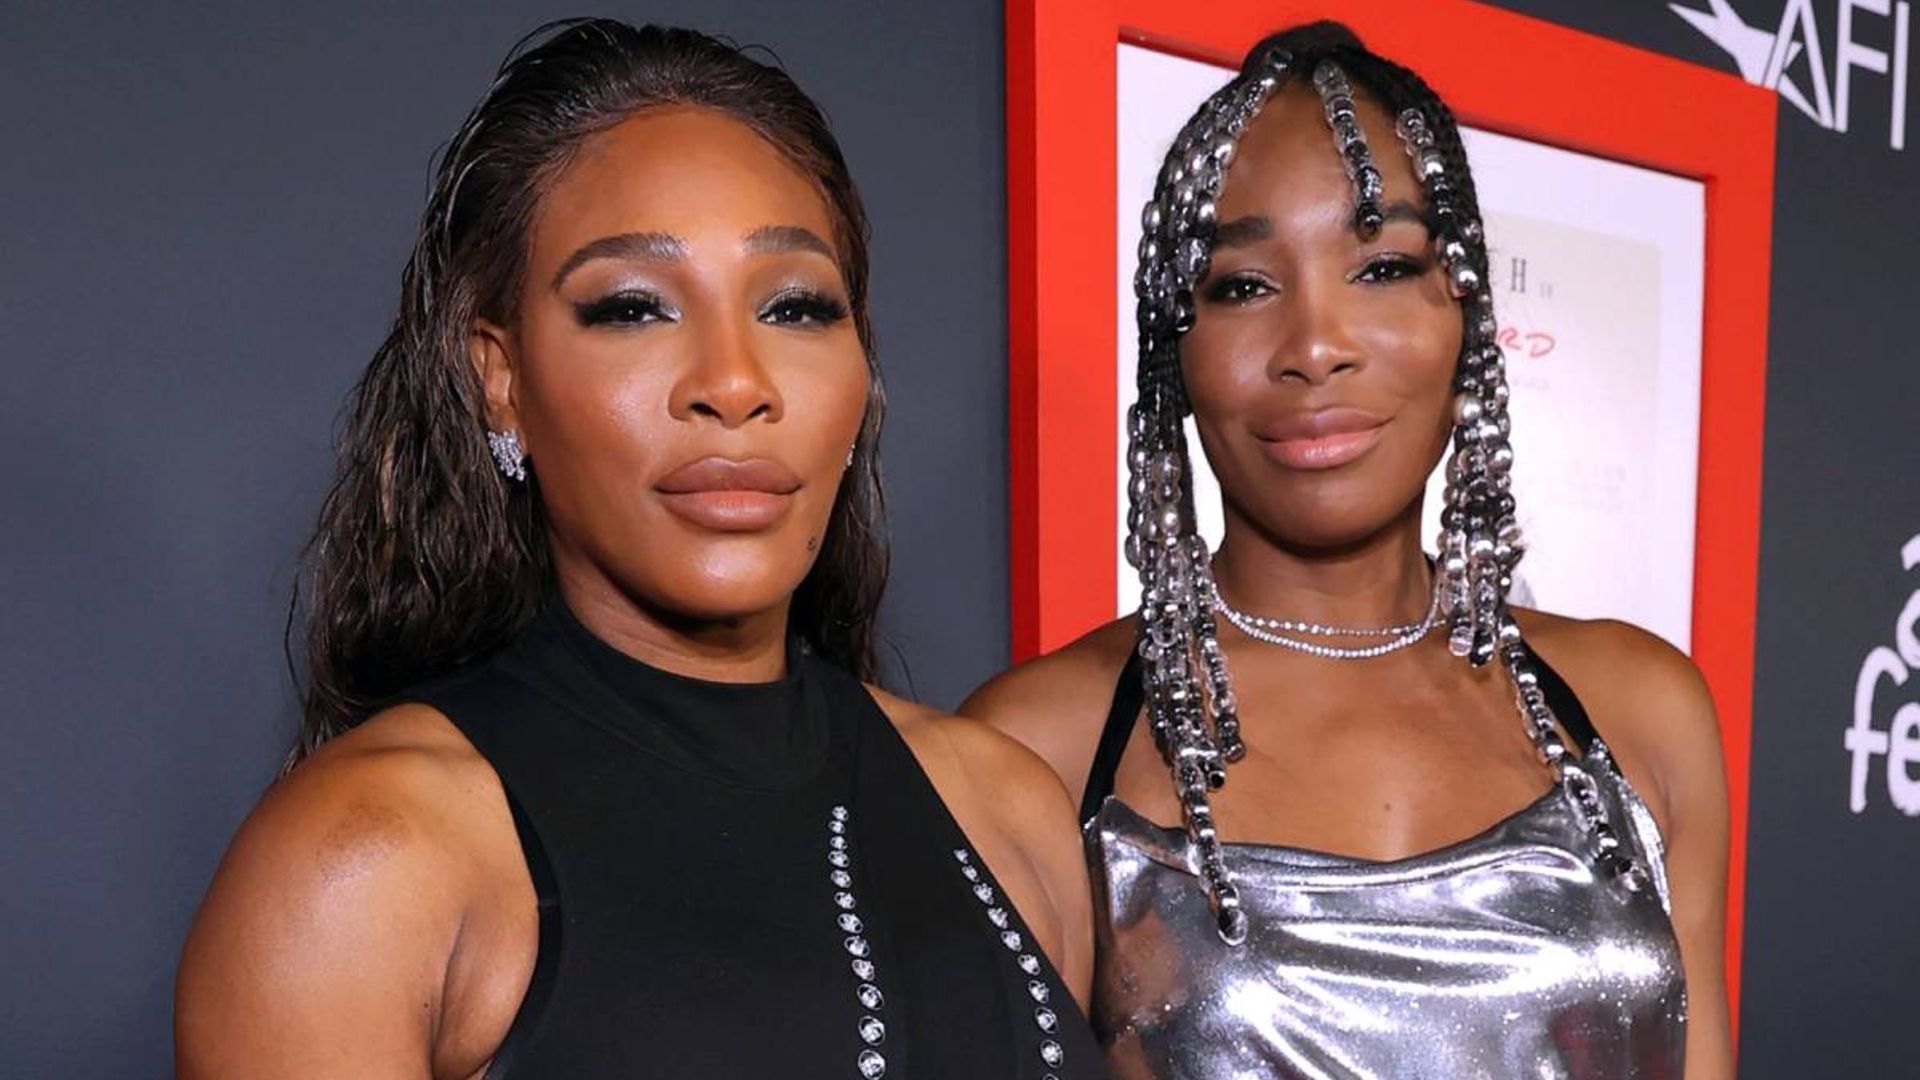 Serena and Venus Williams dazzle fans with latest joint photo shoot